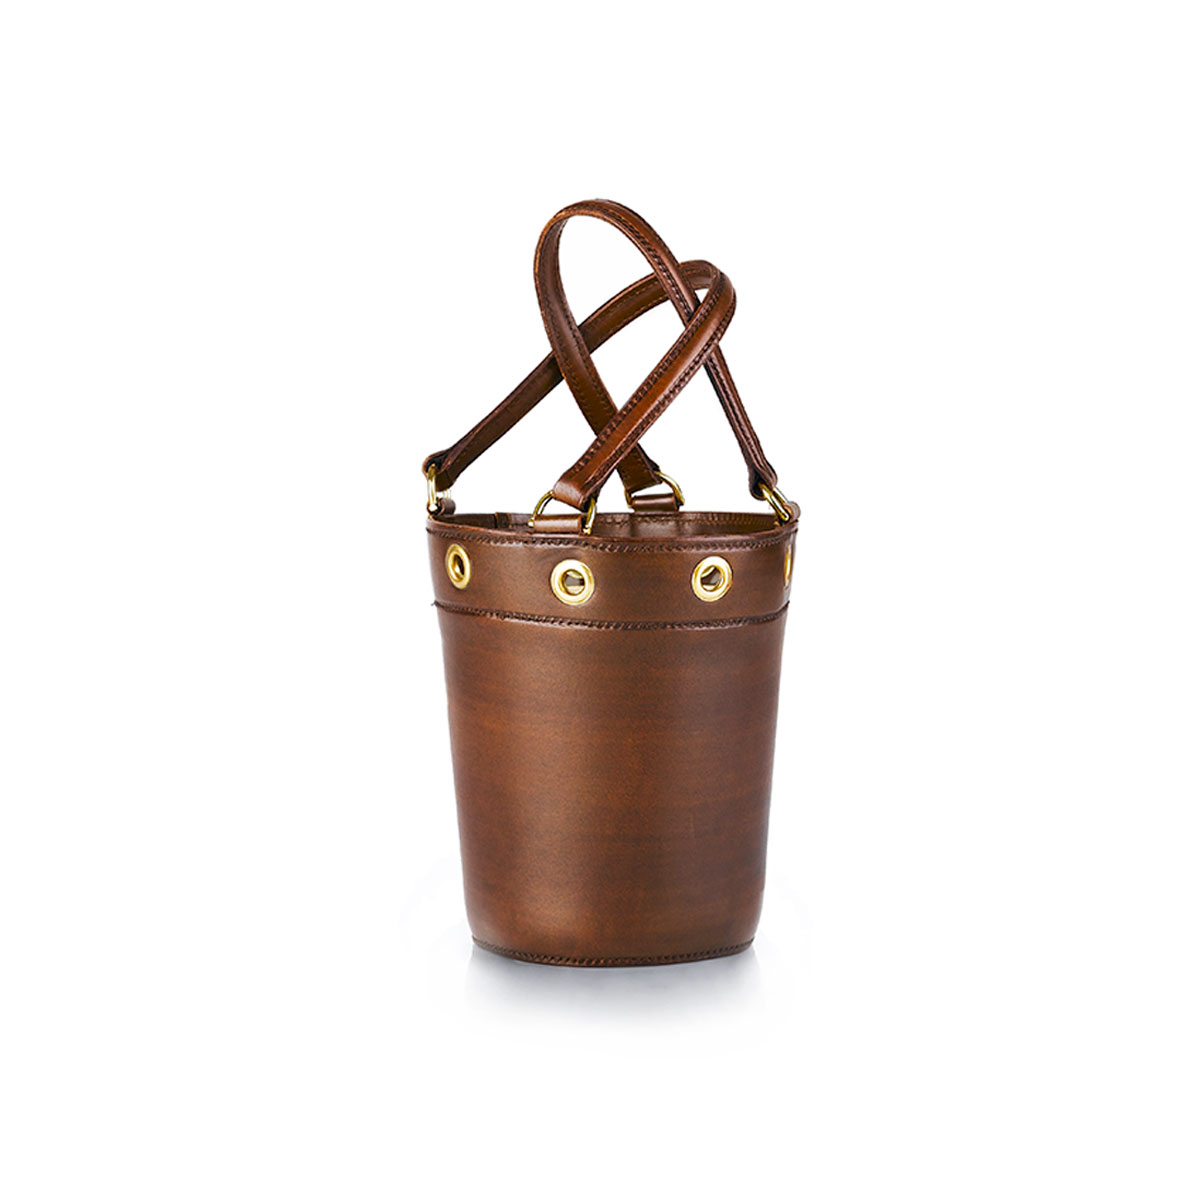 W01 - Small bucket bag 100% Made in Italy by Saddlers Union